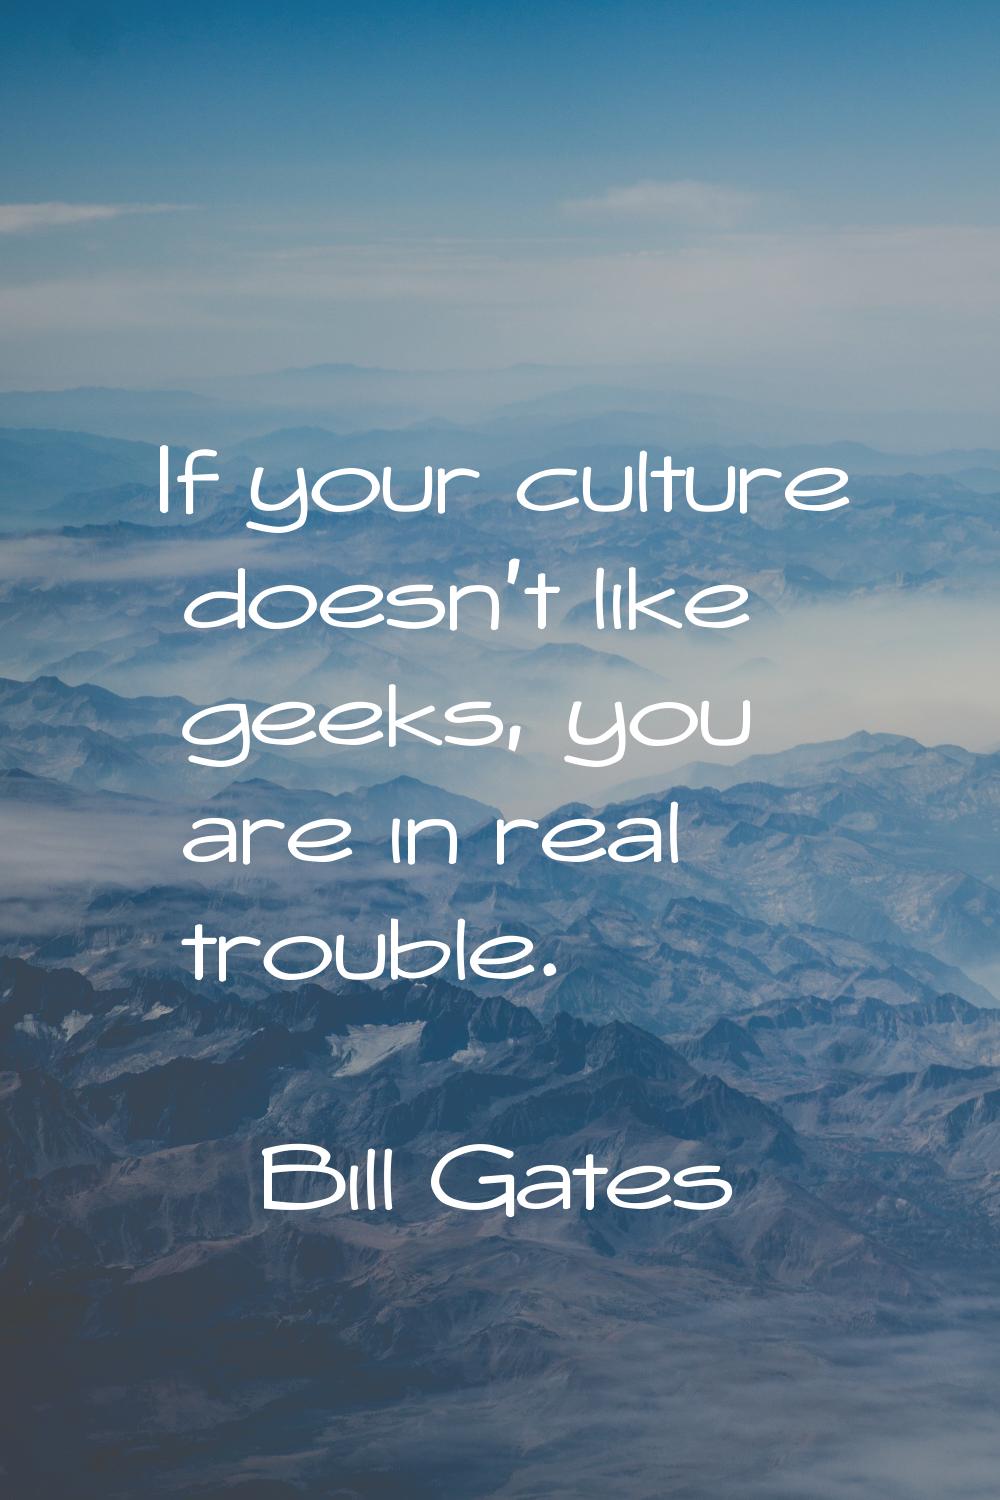 If your culture doesn't like geeks, you are in real trouble.